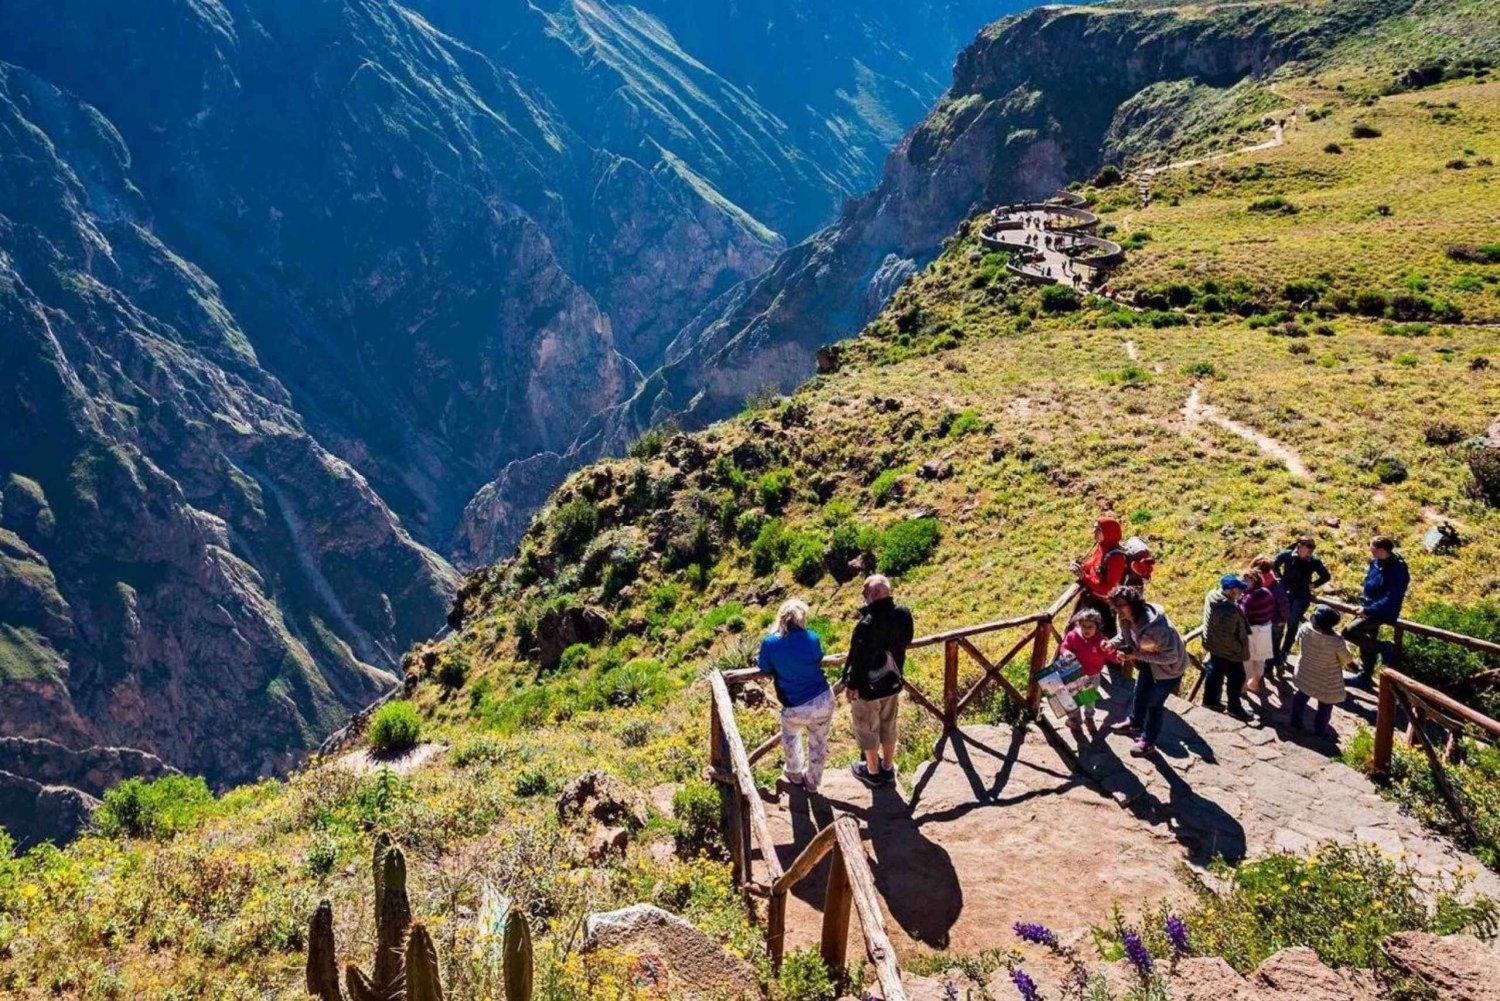 Trip to Colca Canyon 2 Days + Transfer to Puno with Meals